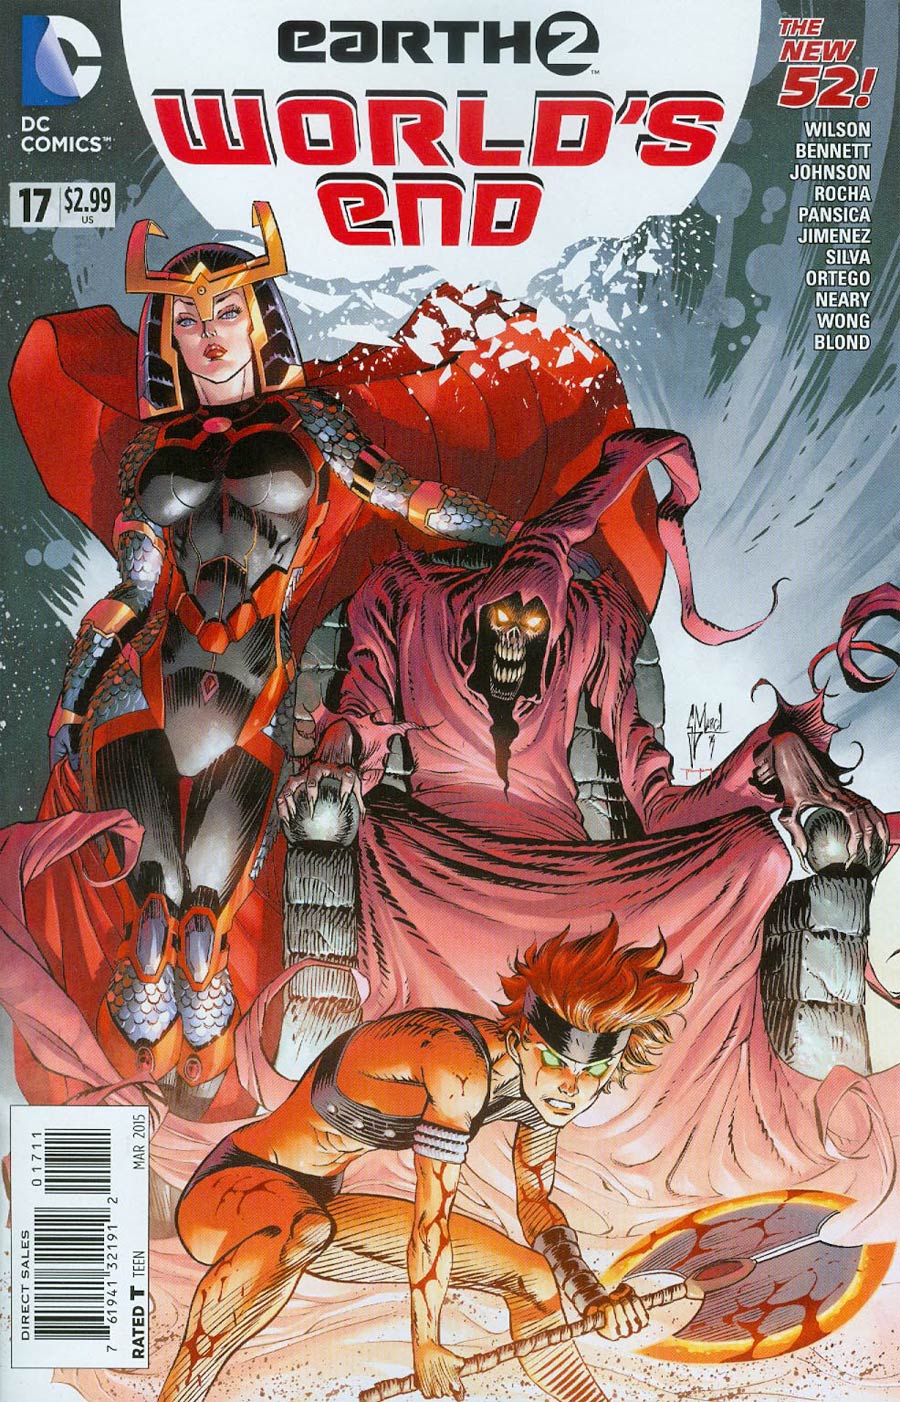 Earth 2 Worlds End #17